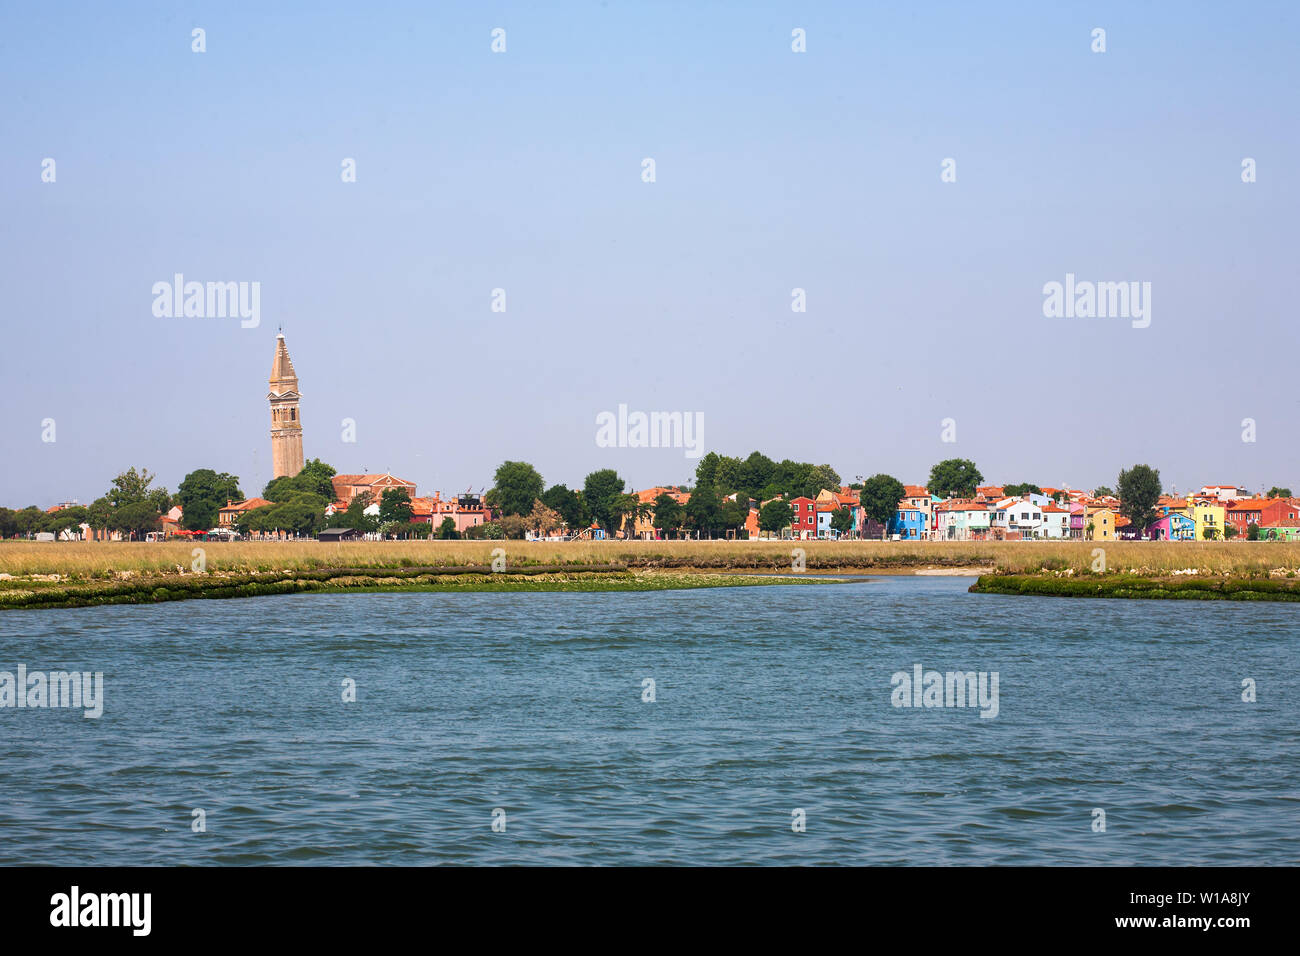 Approaching Burano, with its famous leaning tower, from the Canale di Burano, Laguna di Venezia, Veneto, Italy Stock Photo